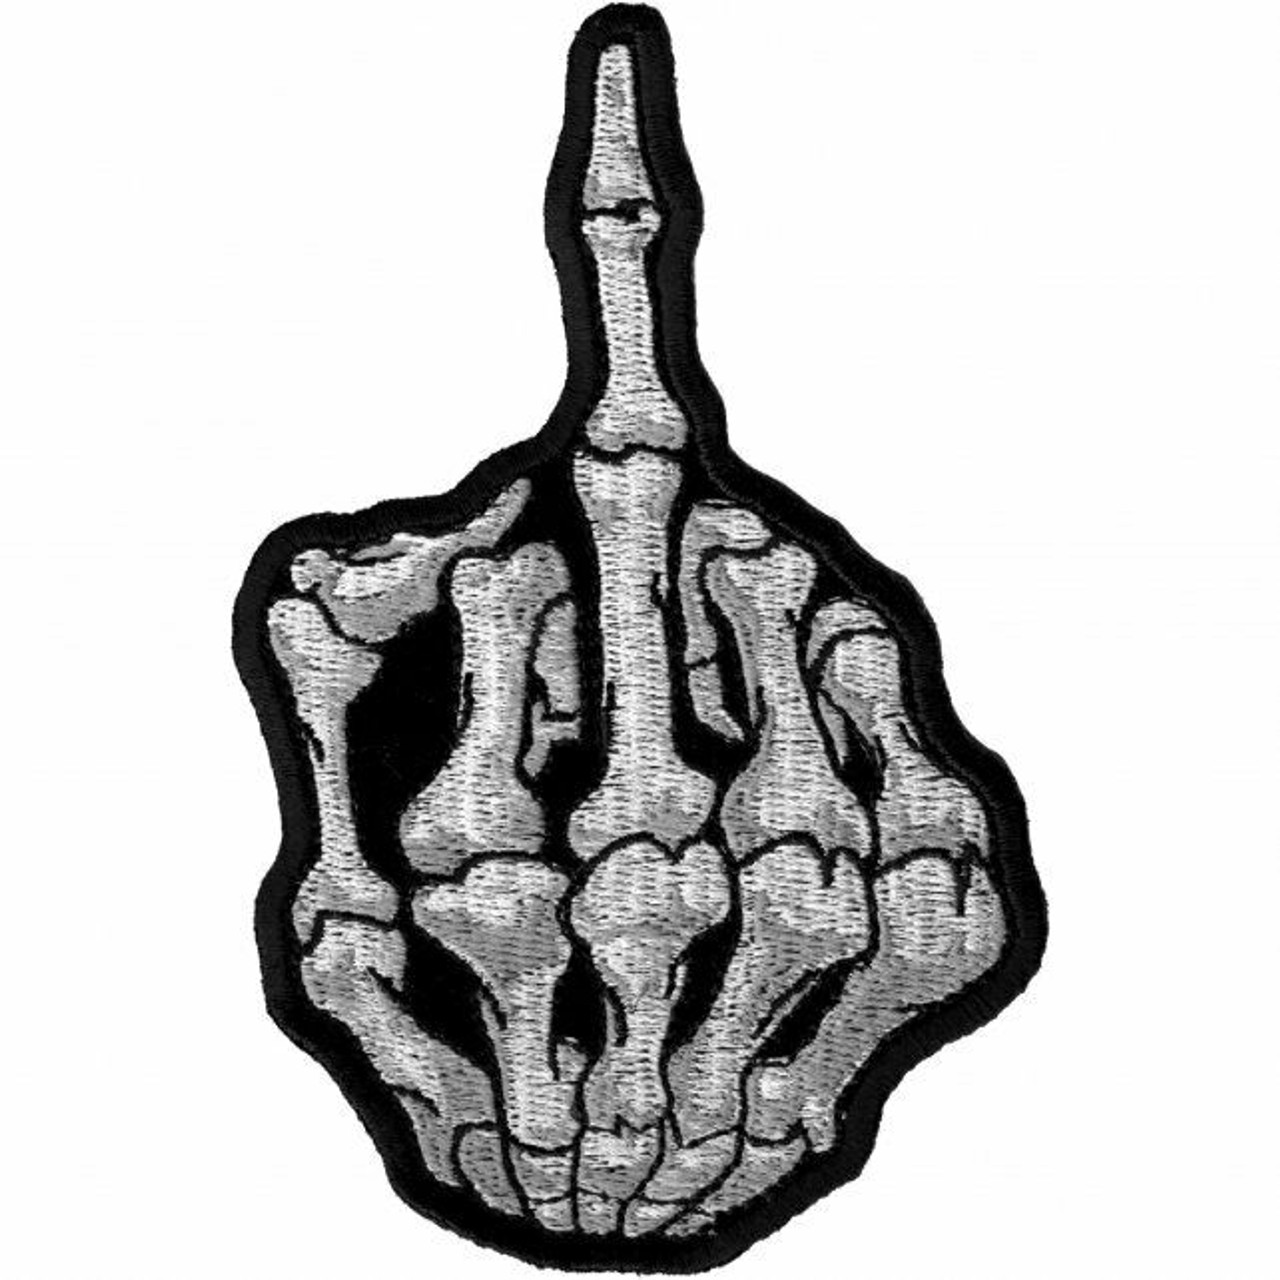 239 Skeleton Middle Finger Stock Photos and Images  123RF